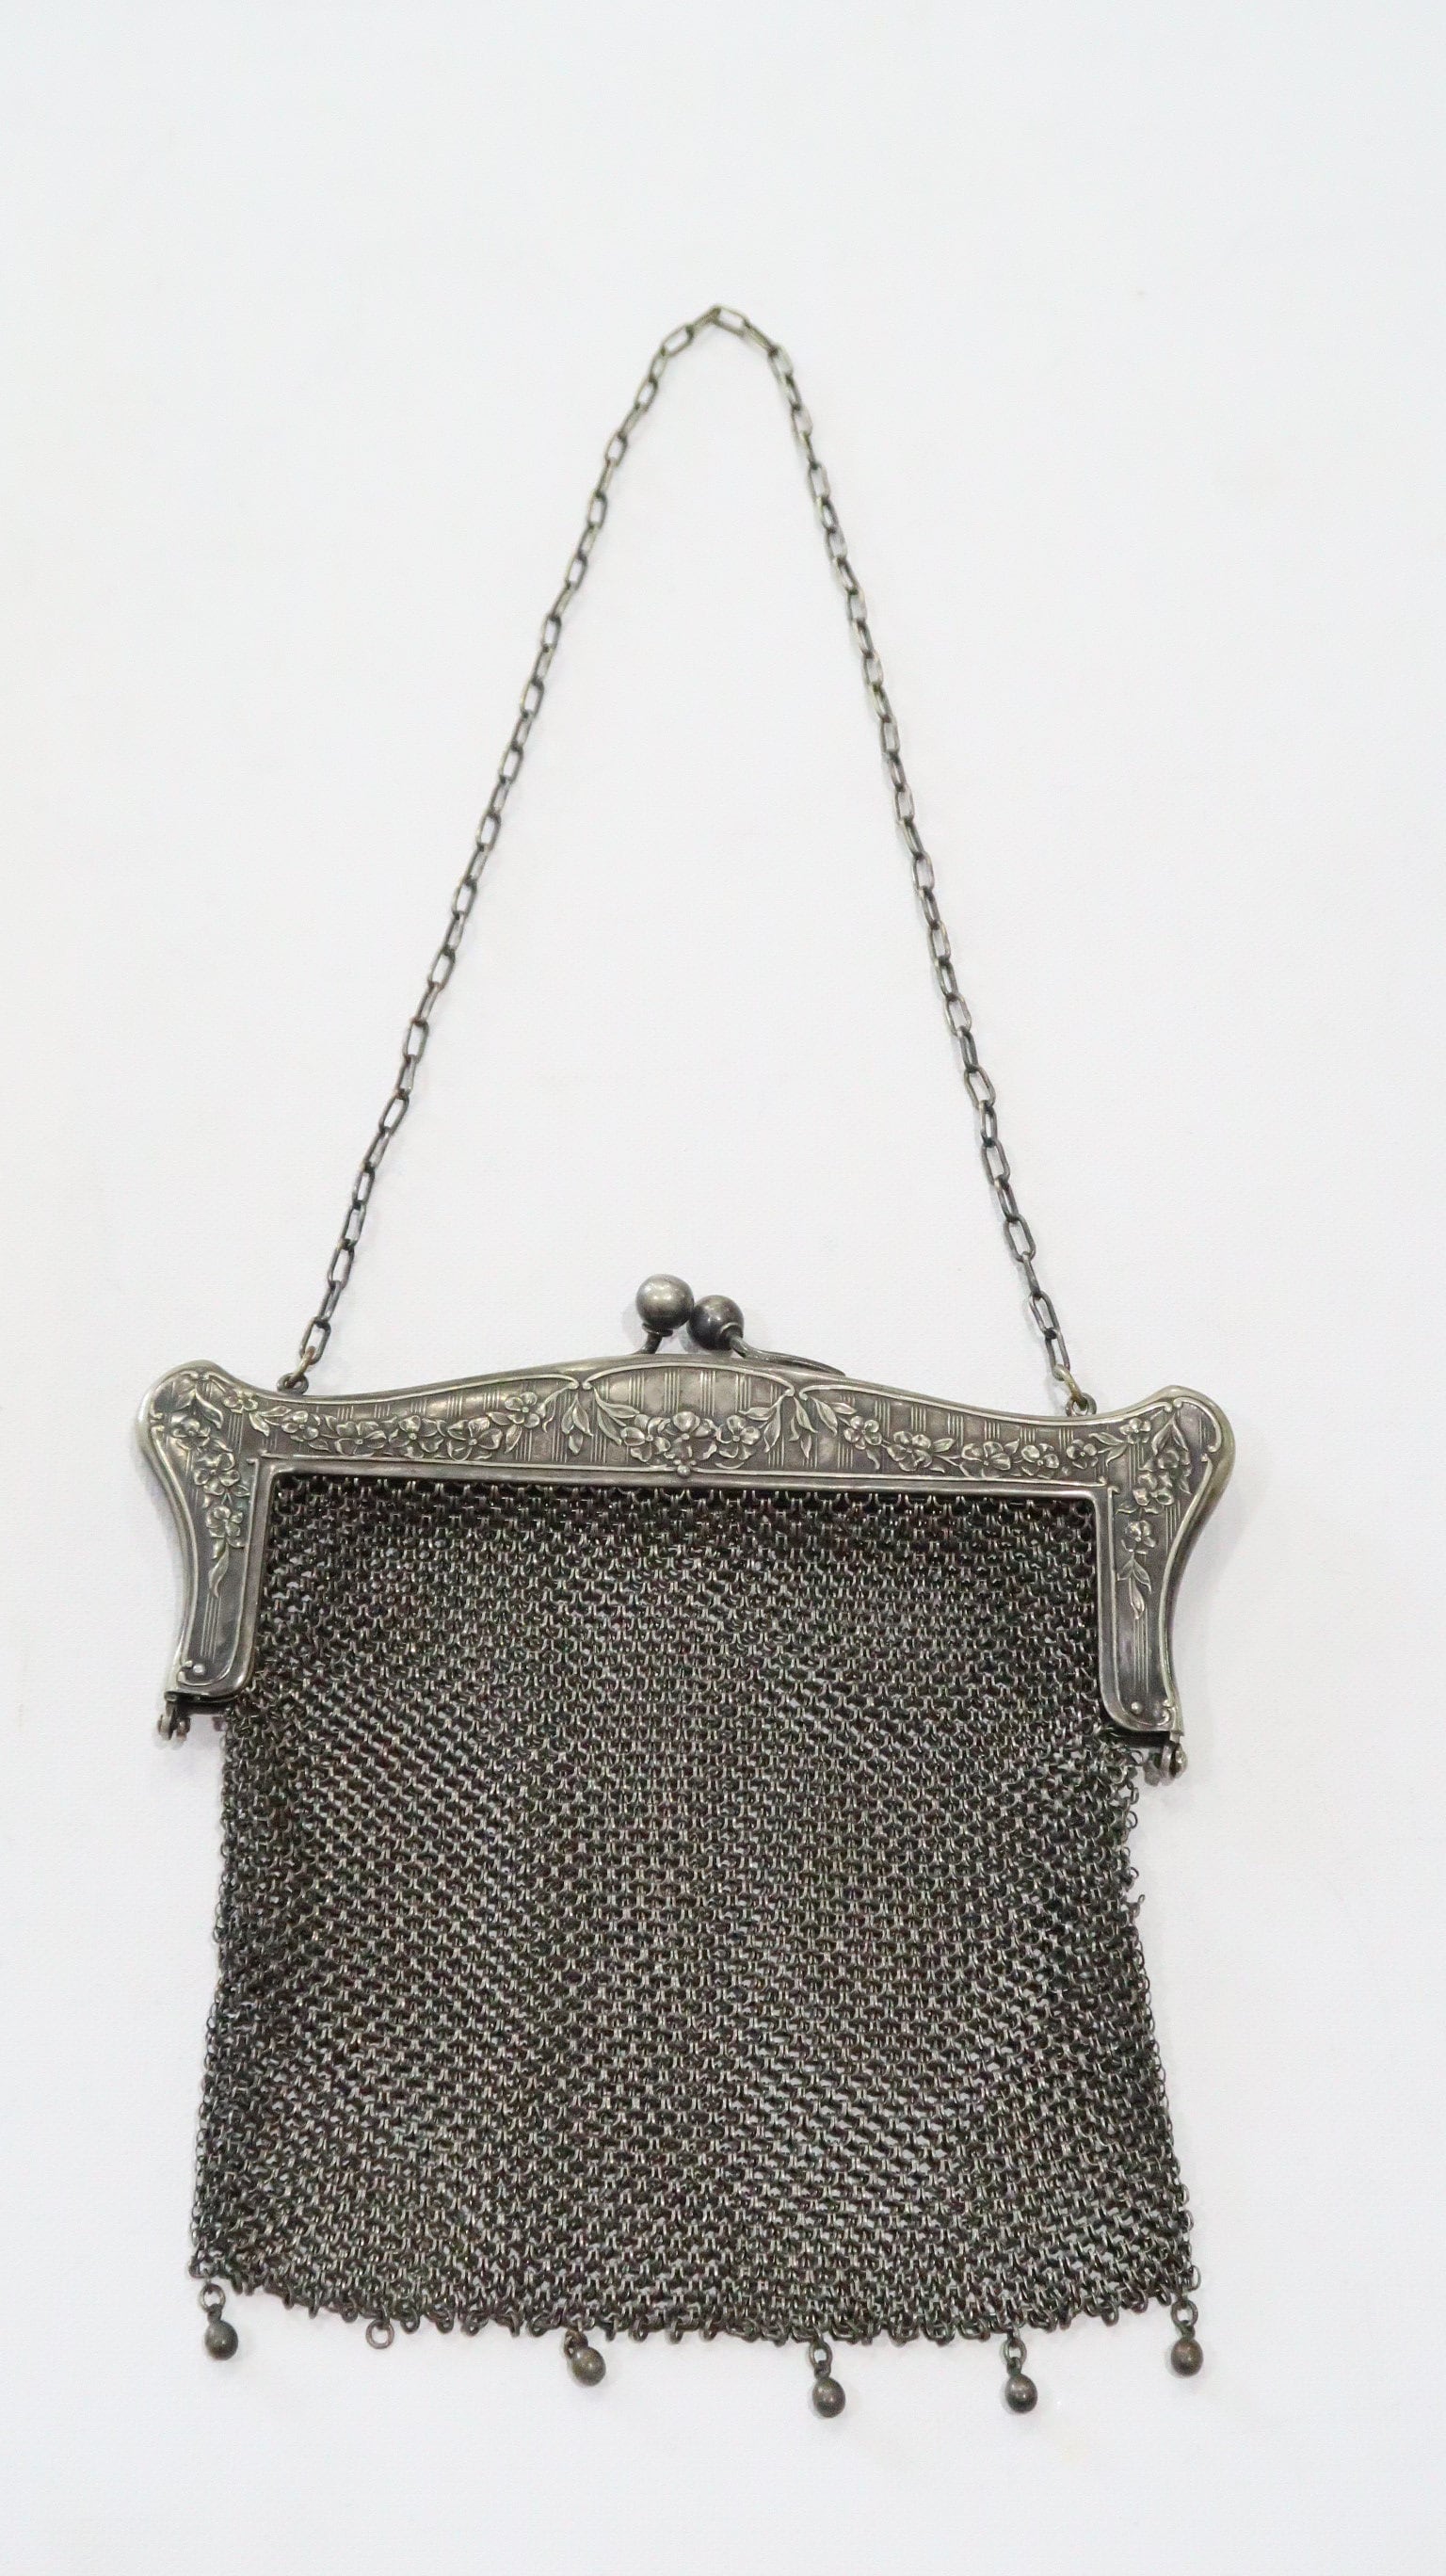 Sold at Auction: German Silver Mesh Purse